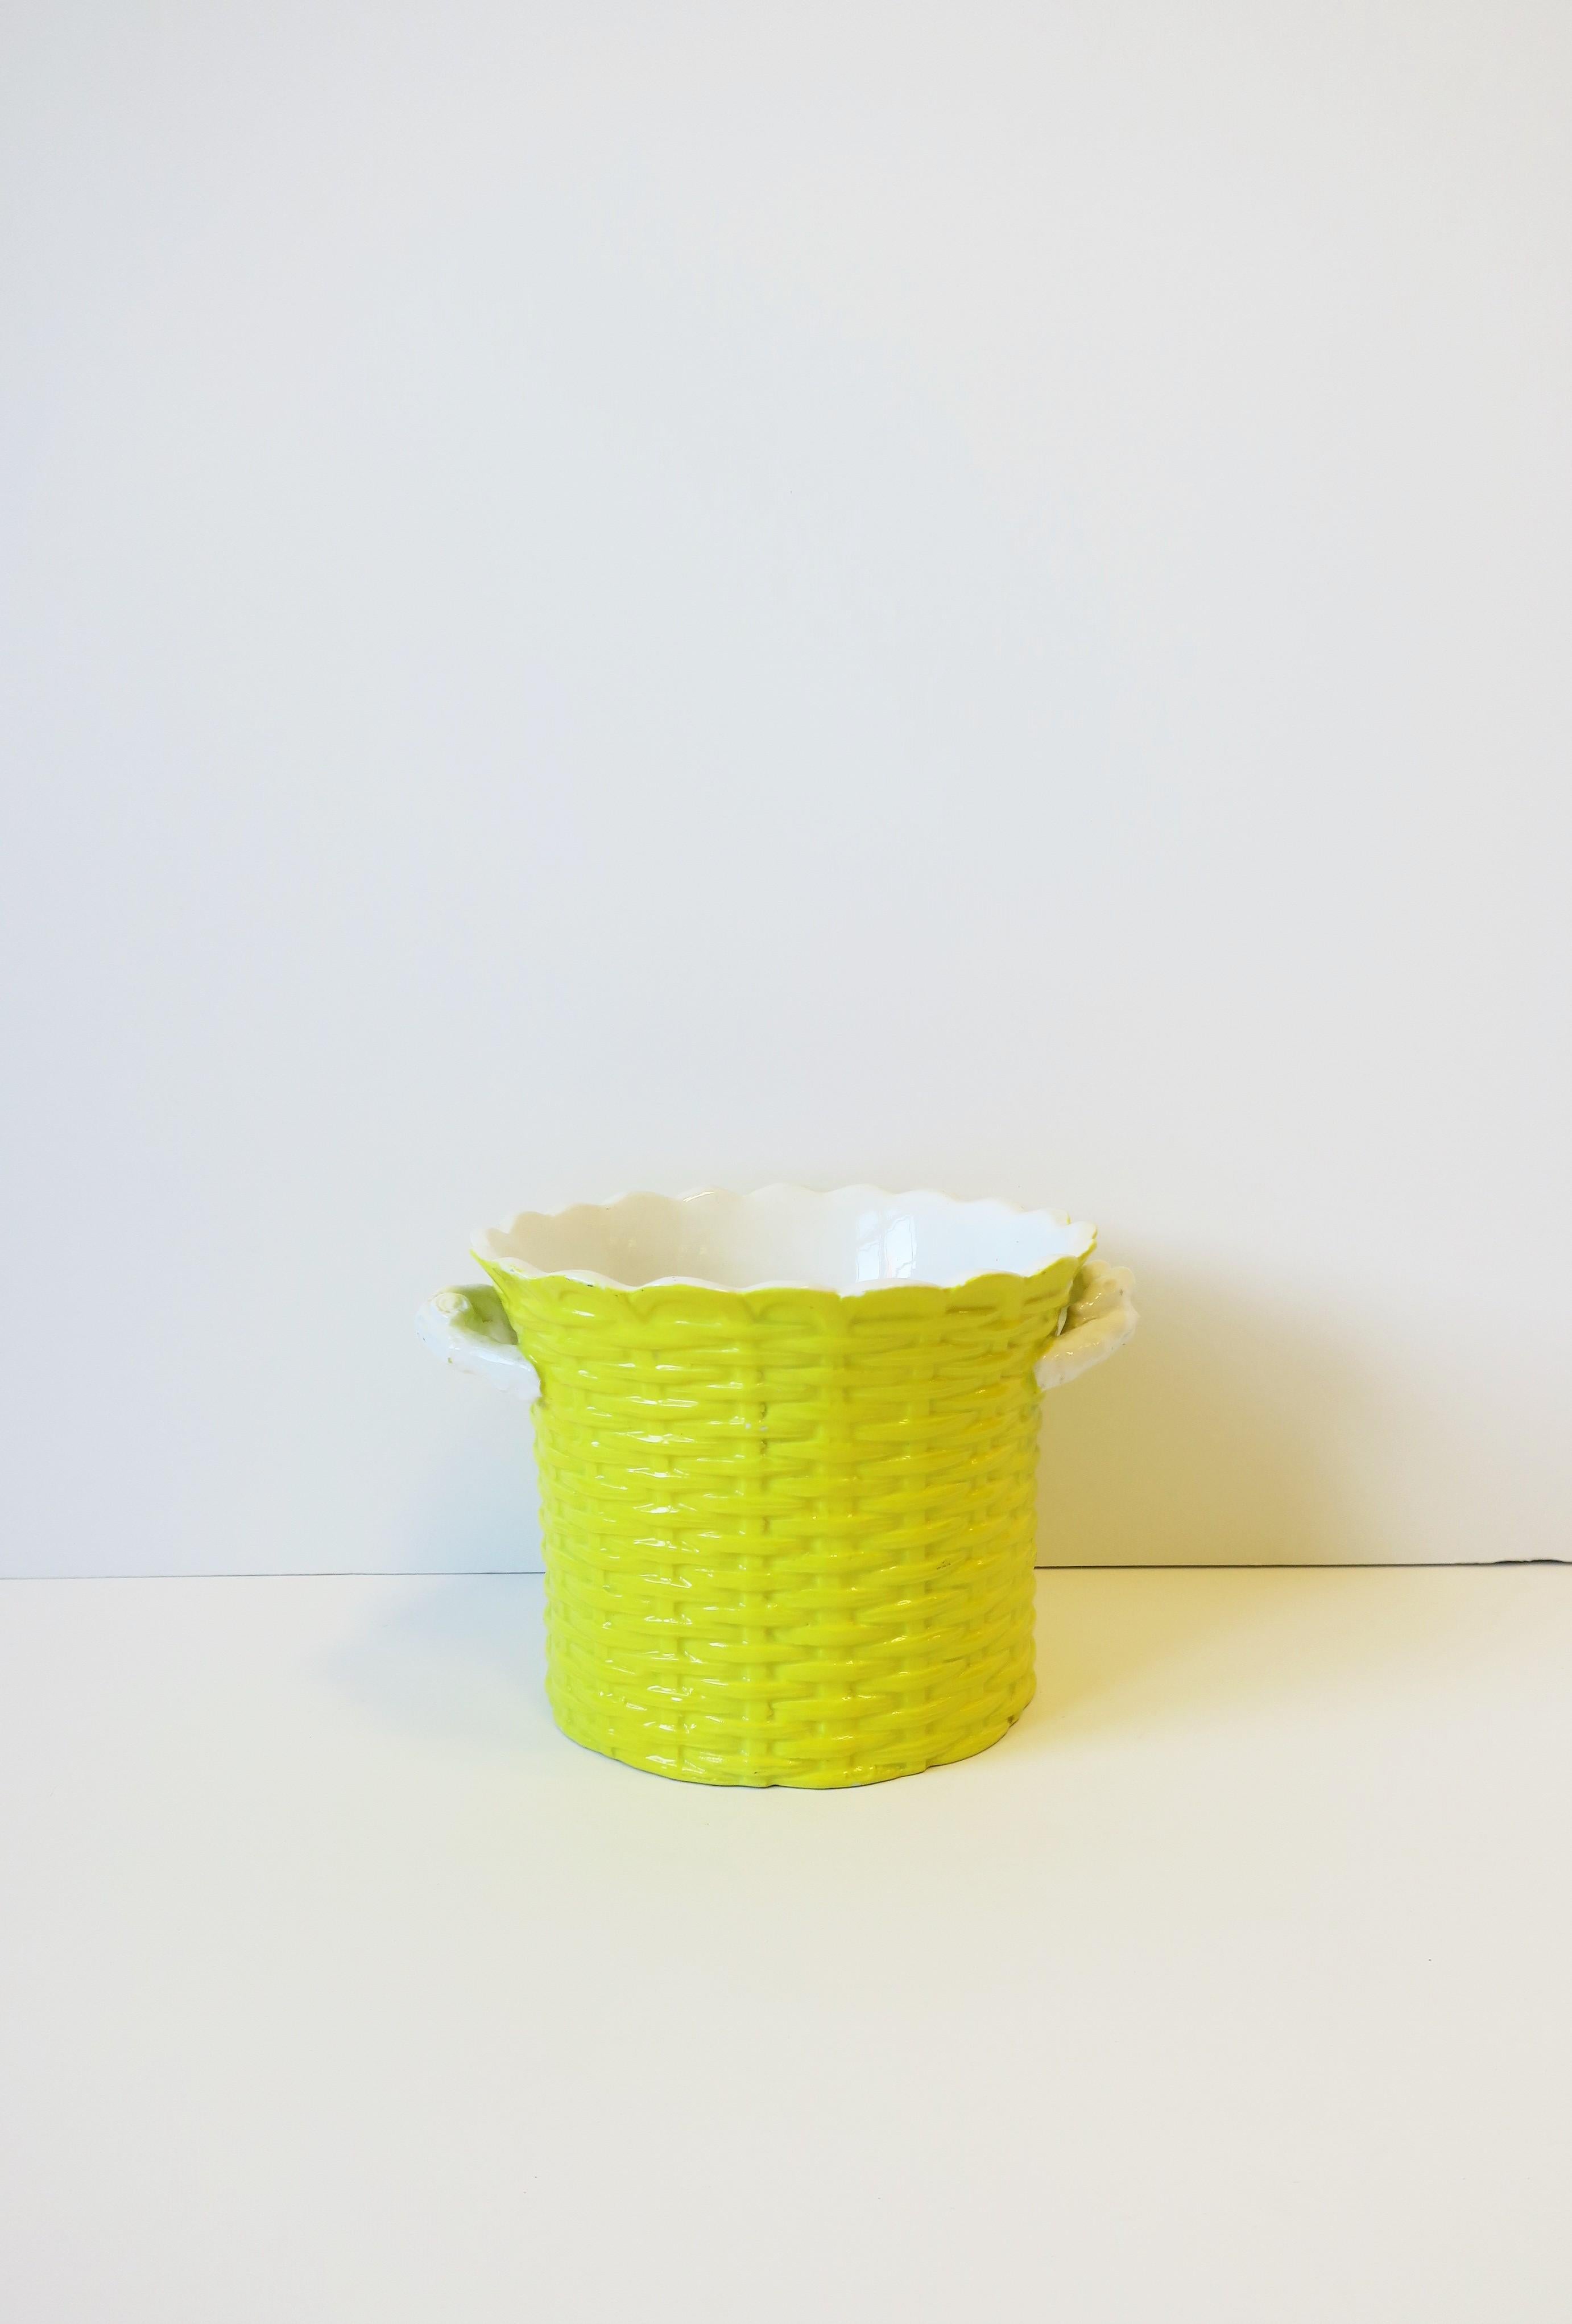 An Italian bright yellow and white ceramic 'wicker' ice bucket/wine cooler or cachepot/plant/flower pot holder, circa 1960s, Italy. Piece has a scalloped top edge, yellow wicker weaved design, and 'branch' handles. Piece is an ice bucket or wine